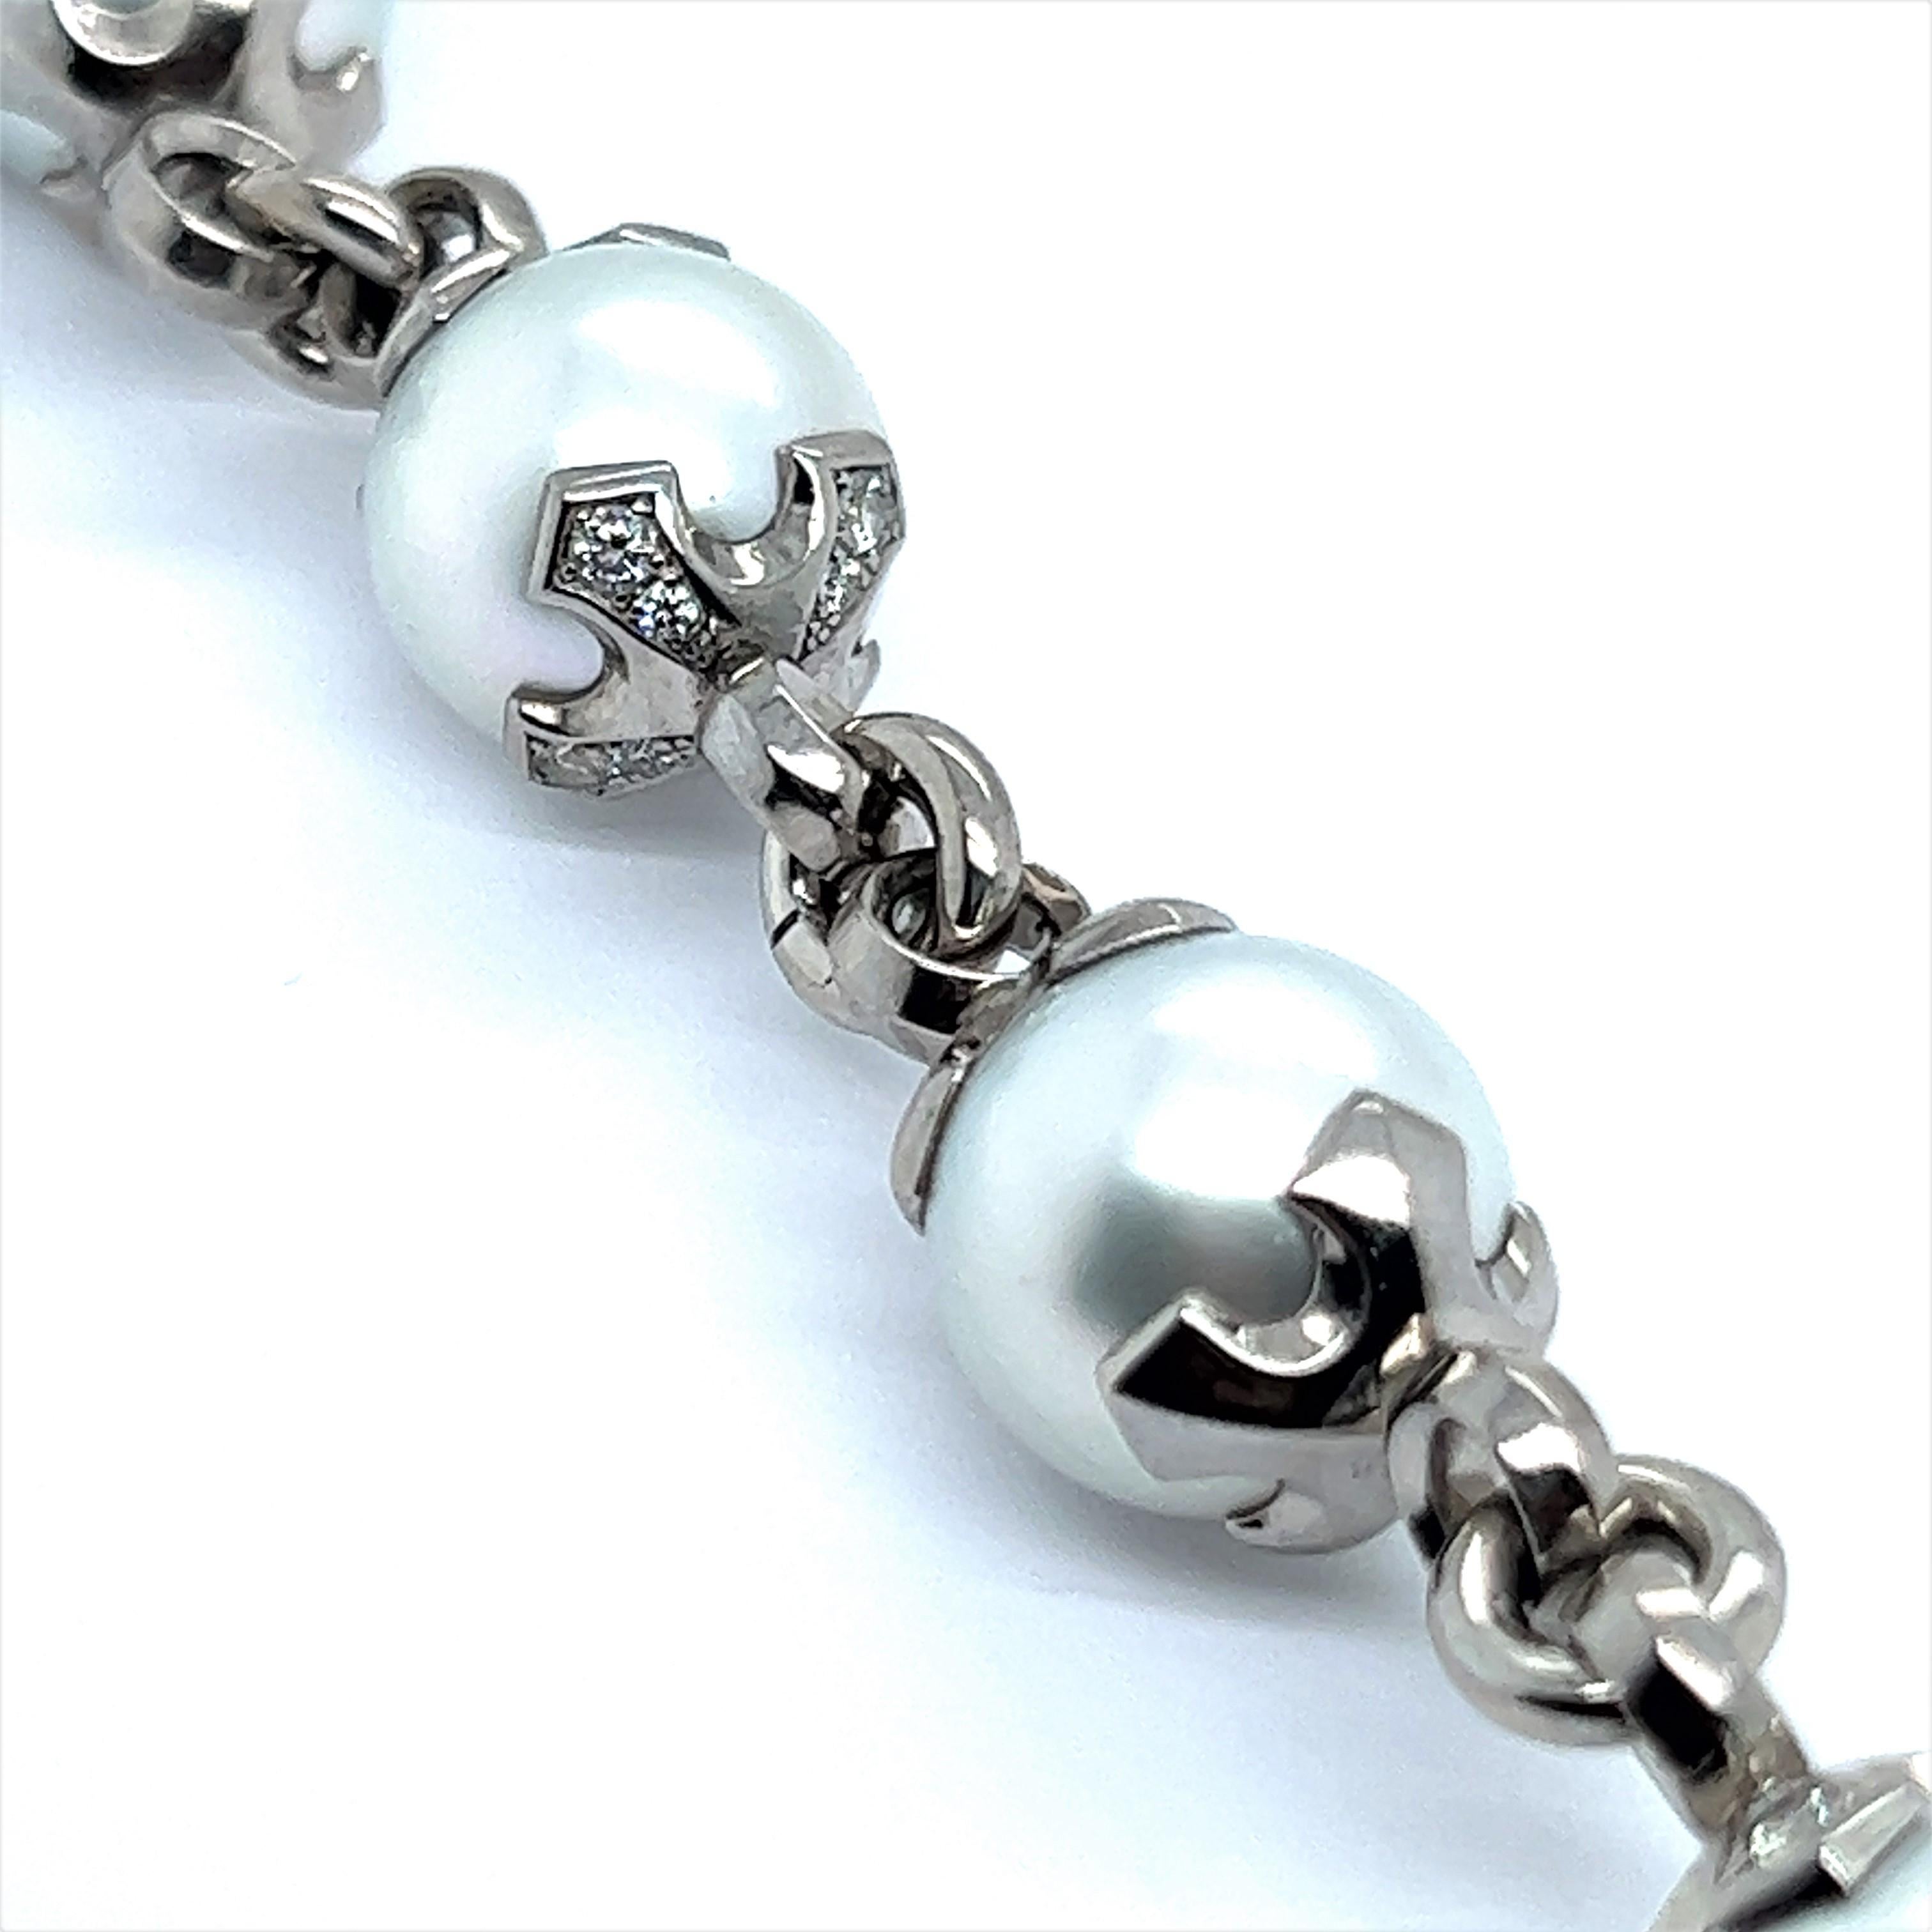 Bracelet with South Sea Cultural Pearls in Palladium 950 For Sale 4